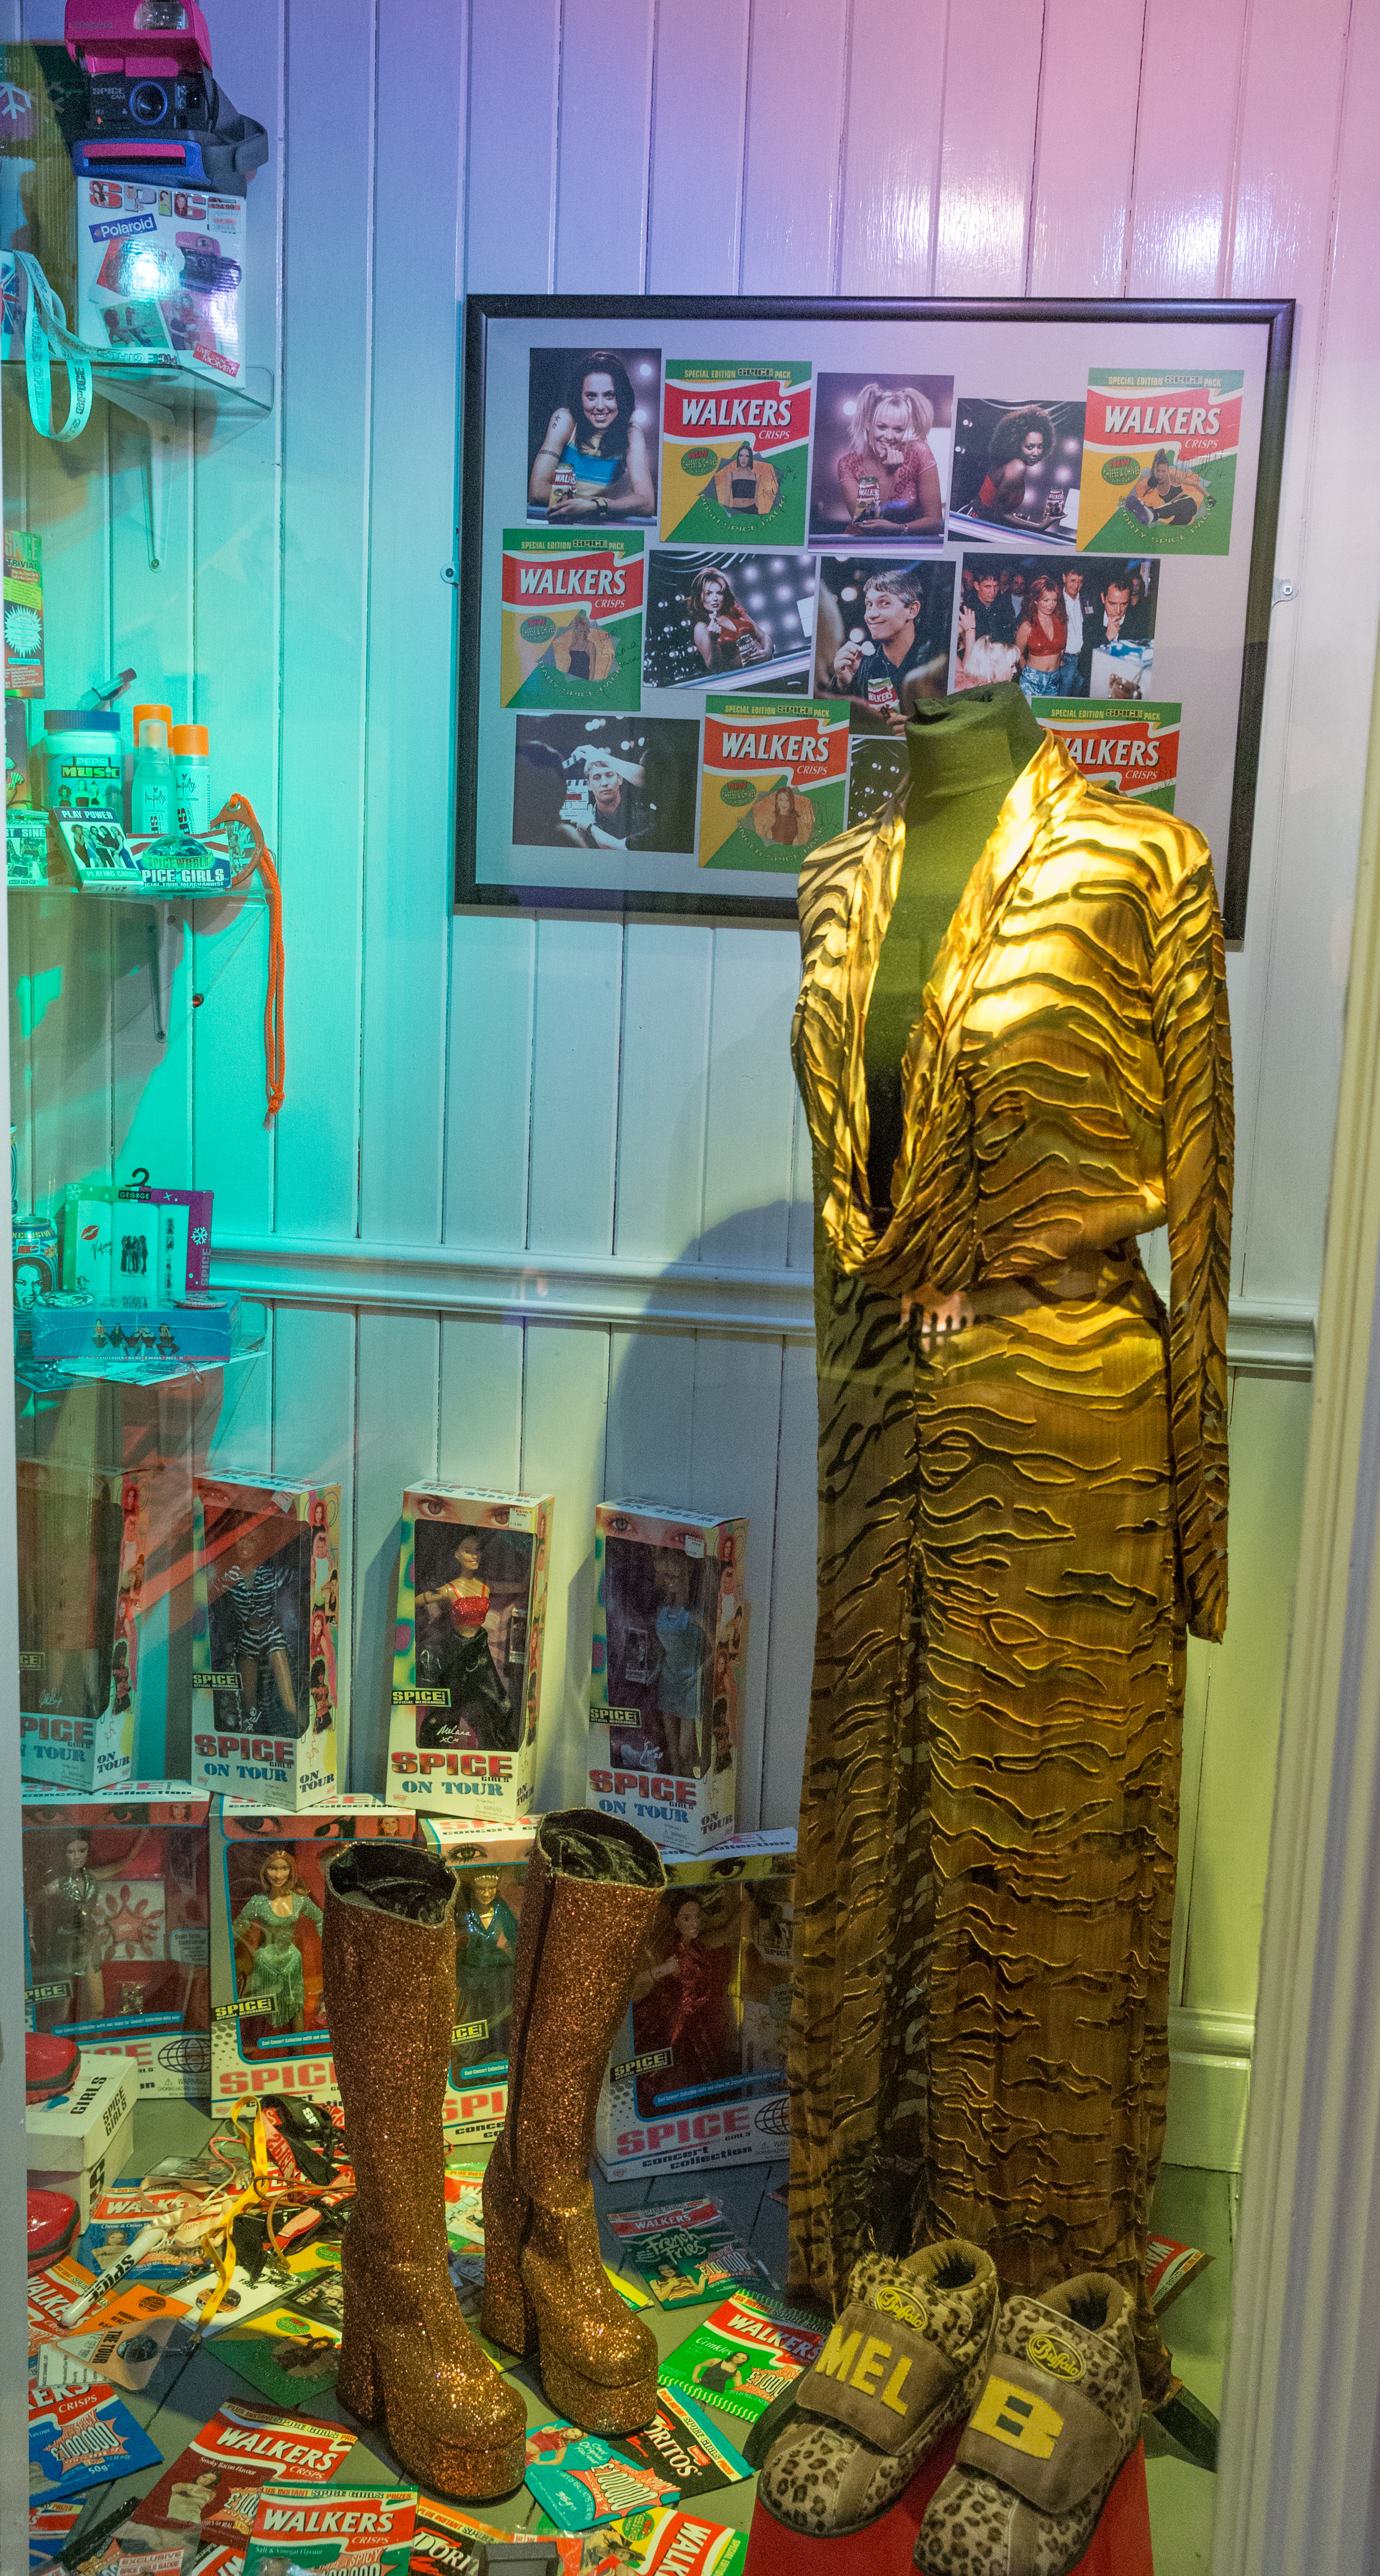 18. Spice Girls Exhibition at Ripley's Blackpool. Photo Credit - Steve Lee, 2016.jpg